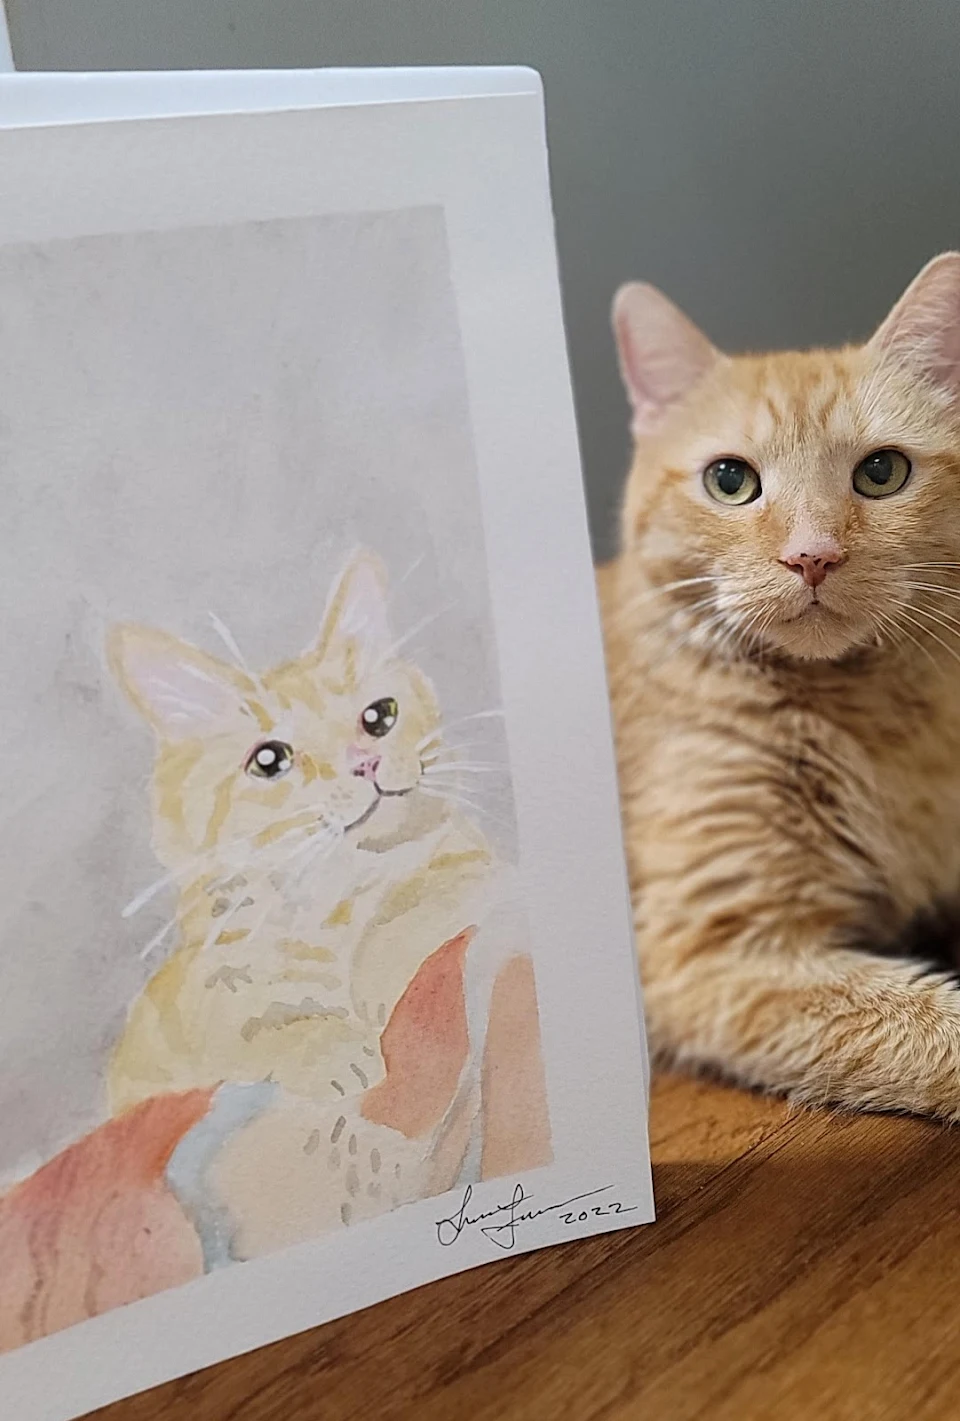 Tigger loves his portrait! Thank you u/PolymerPussies Tigger also had another checkup today and his diabetes is under control!